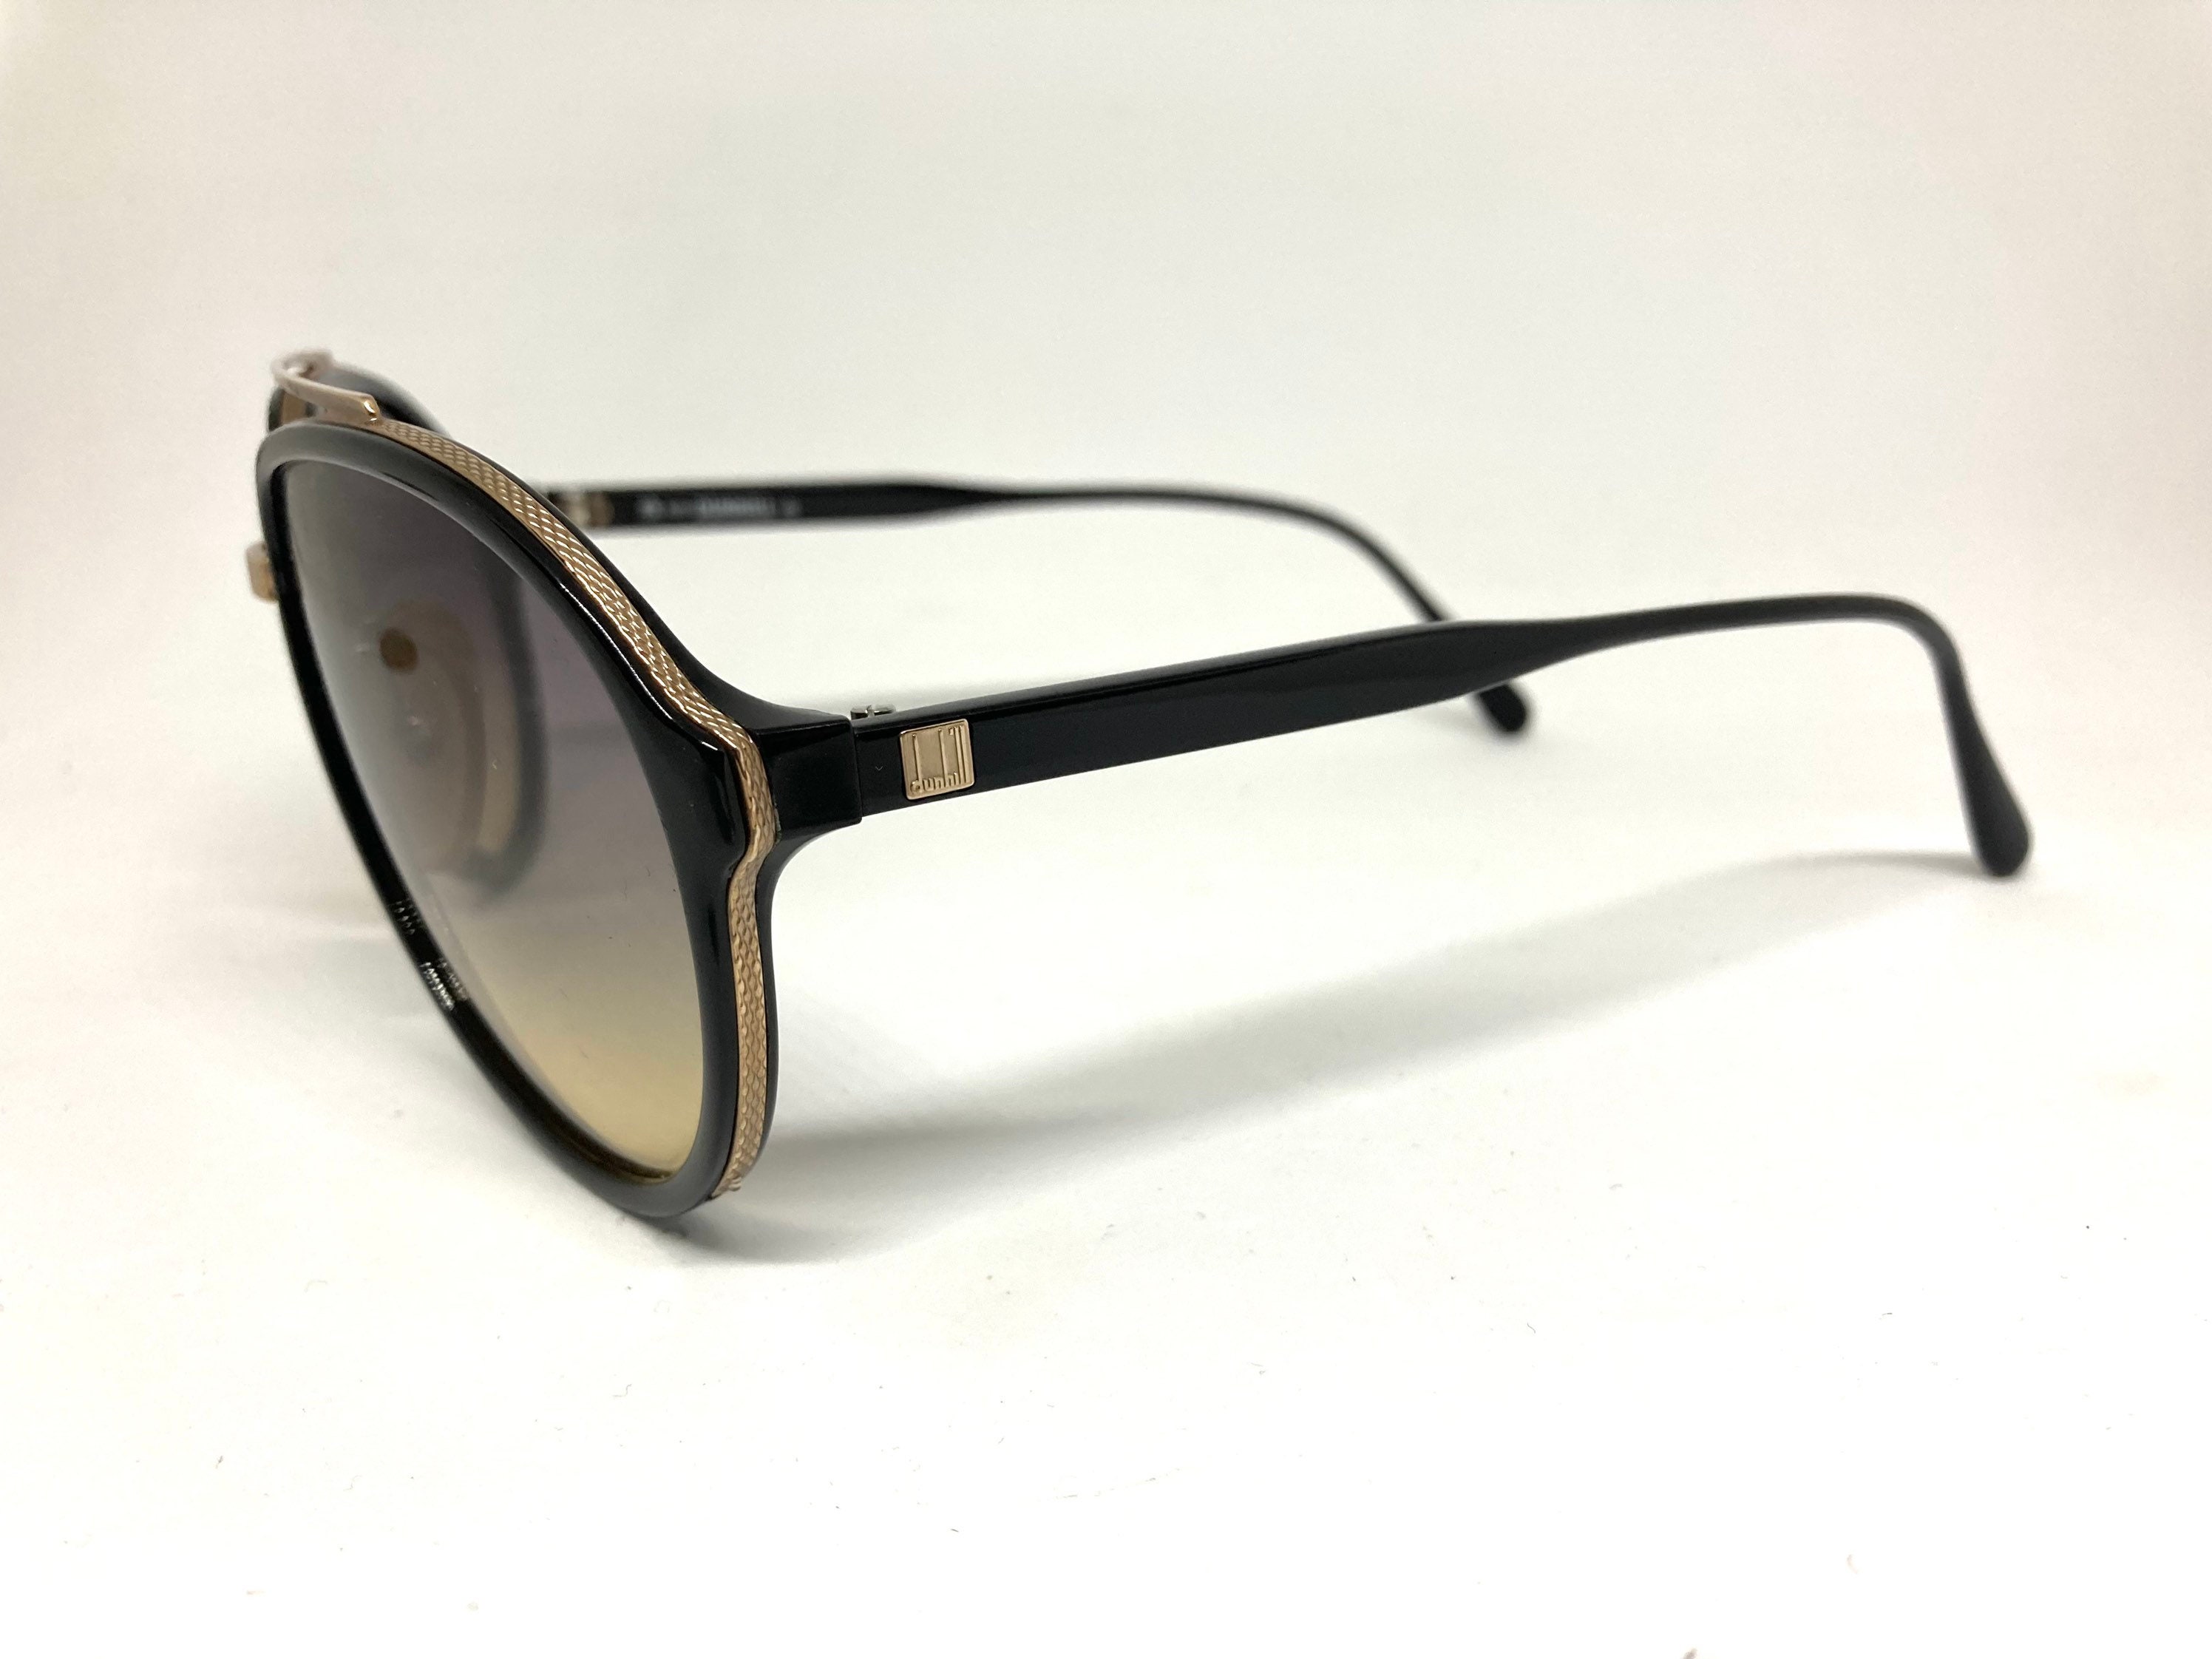 Vintage Dunhill 6105 90 Sunglasses 59-18-140 - Etsy